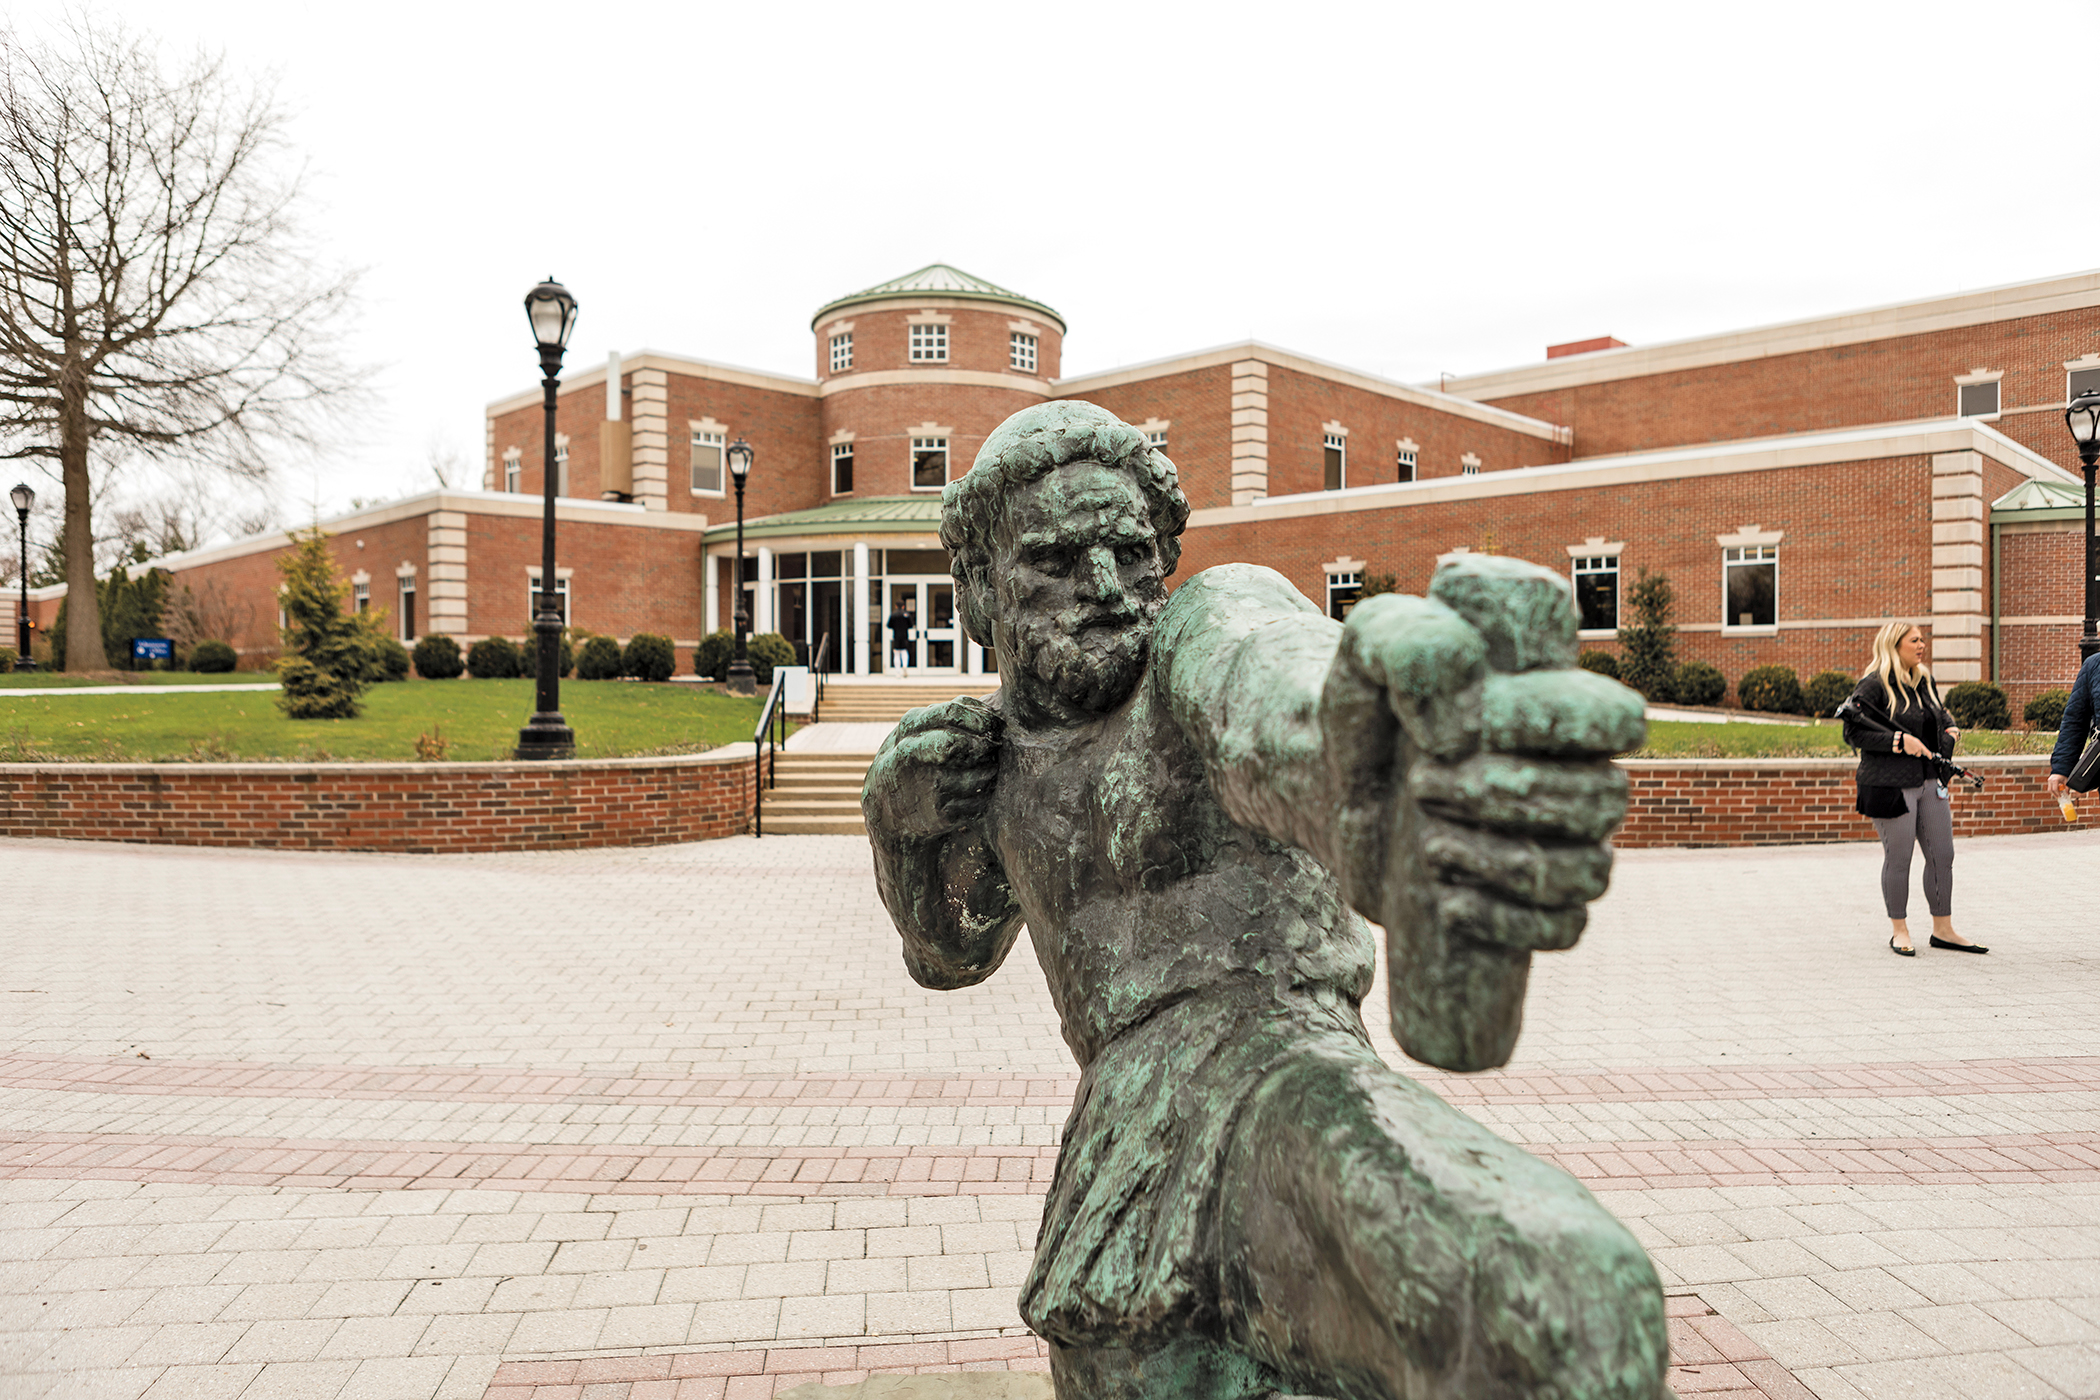 The Ulysses statue in Dreyfuss Plaza at the Florham Campus.